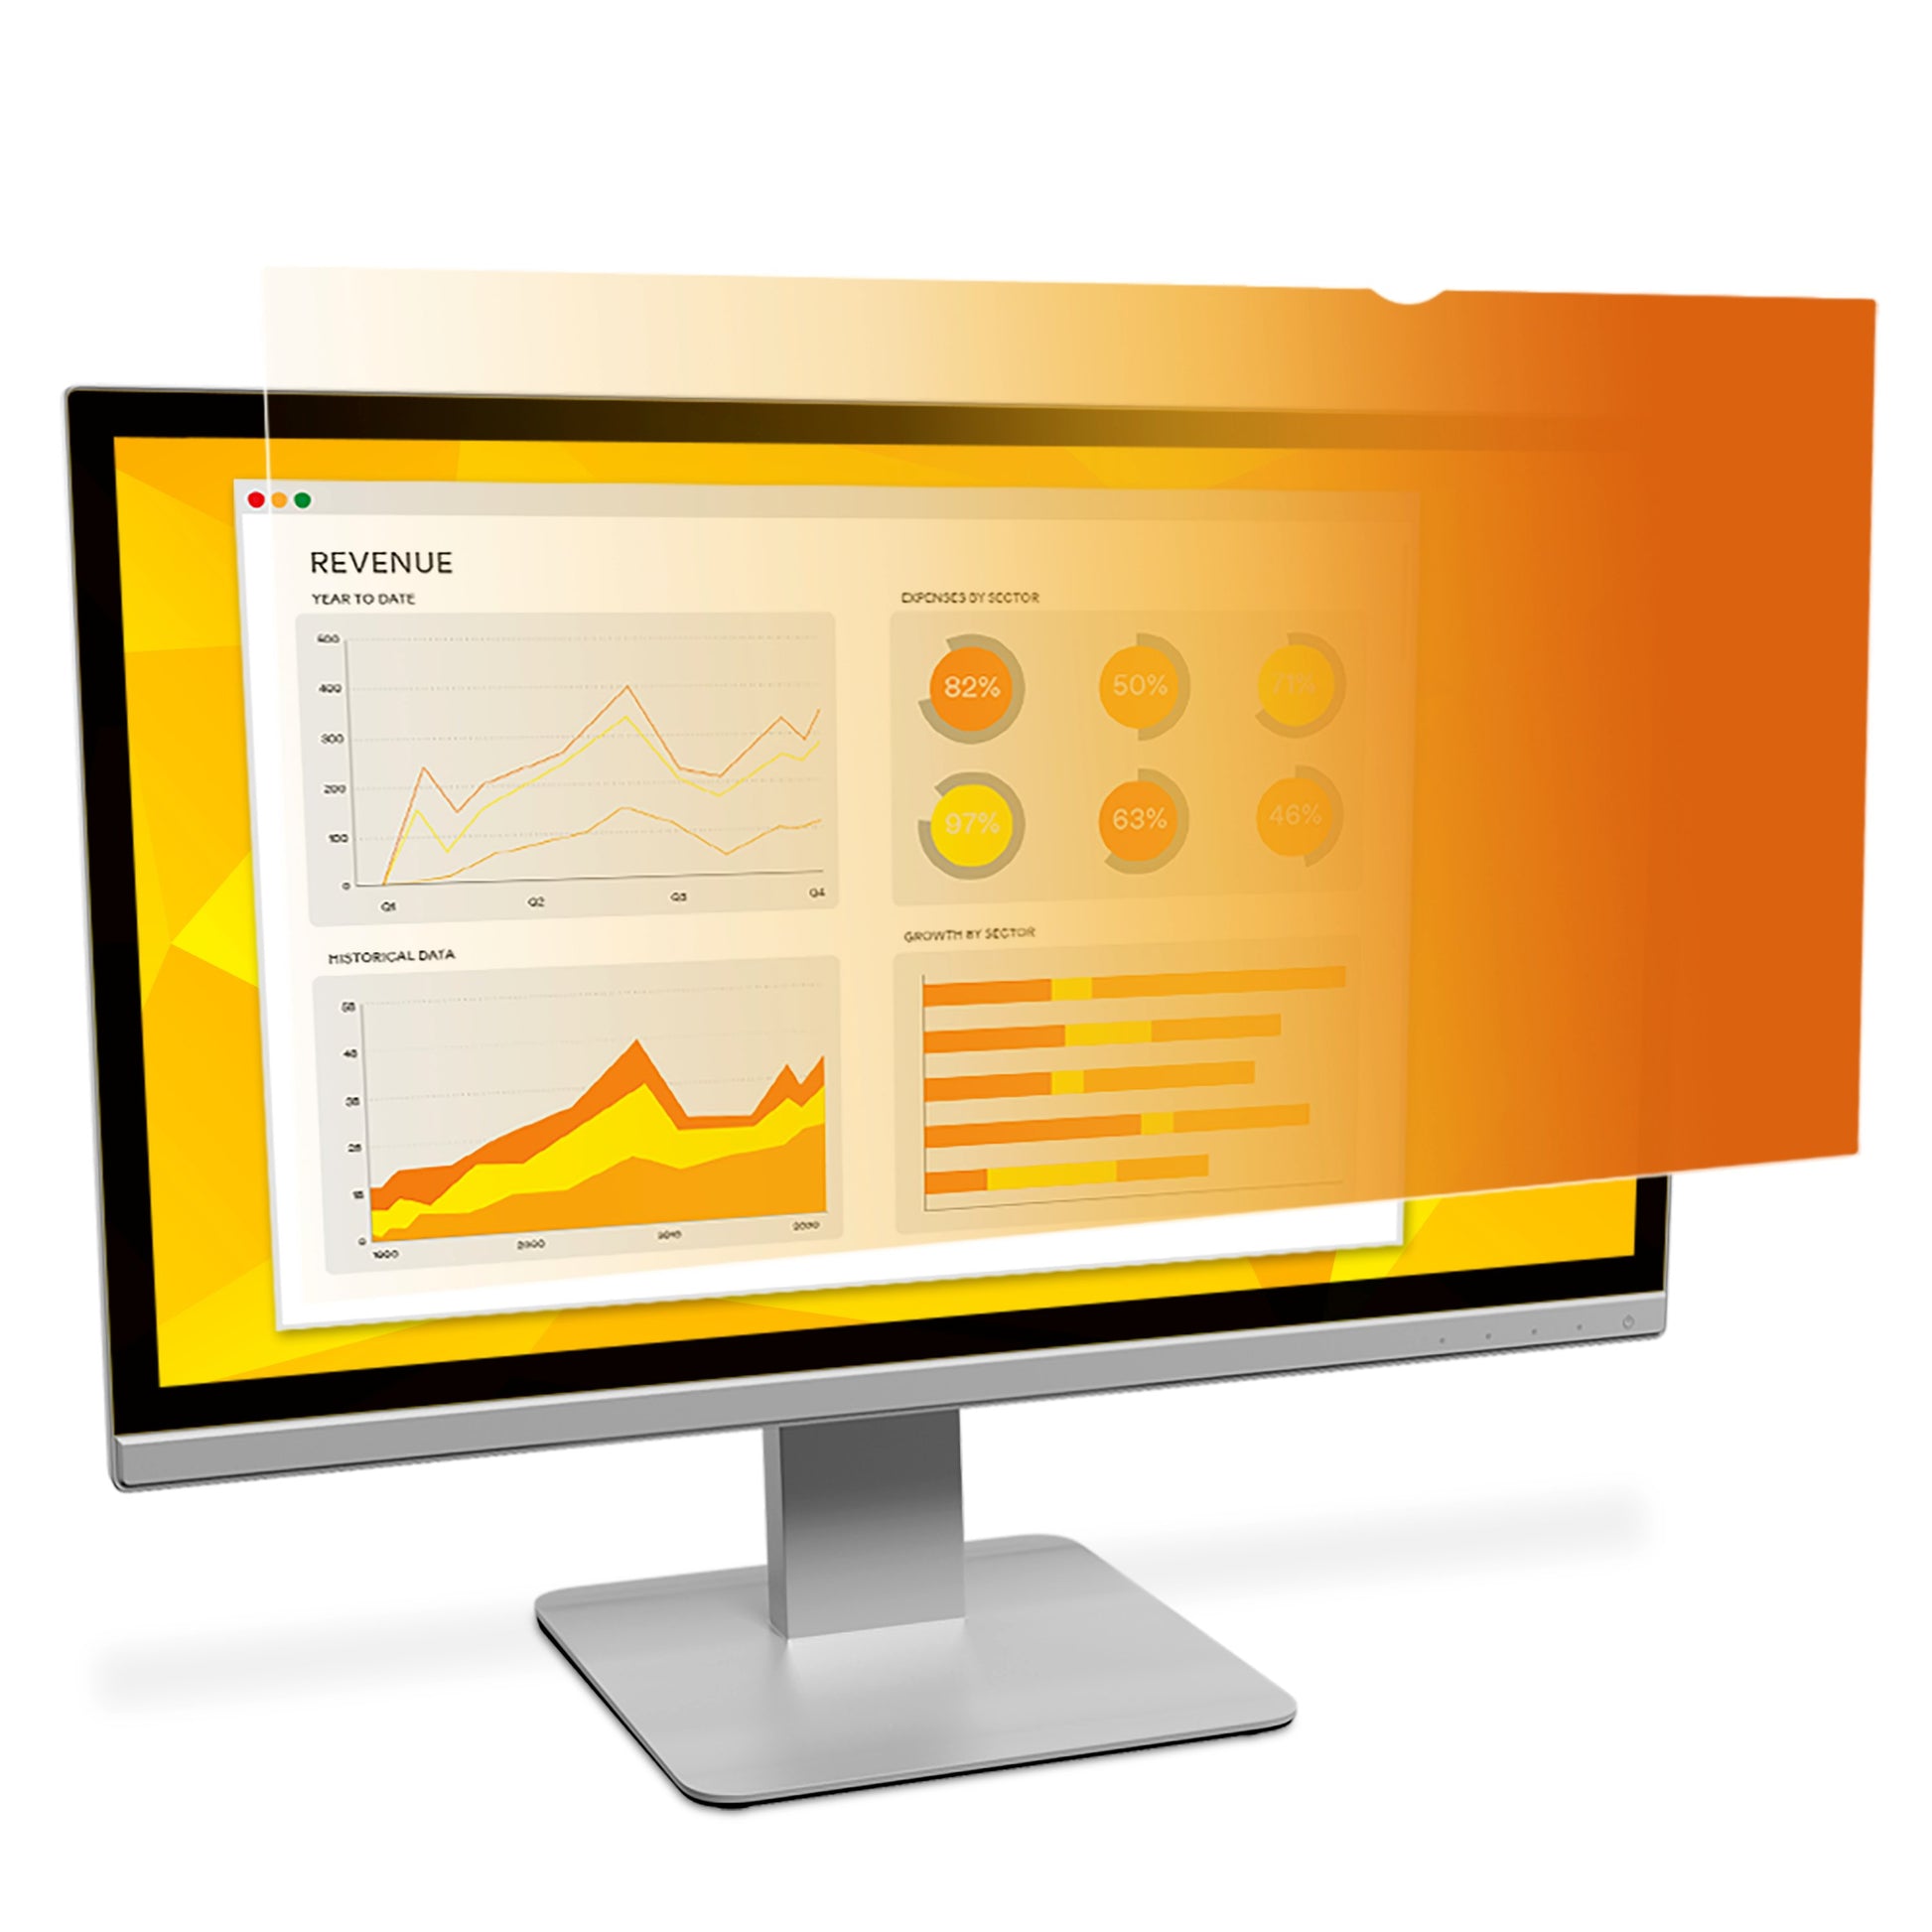 3M™ Gold Privacy Filter for 24" Widescreen Monitor (16:10) (GF240W1B) - TechExpress 